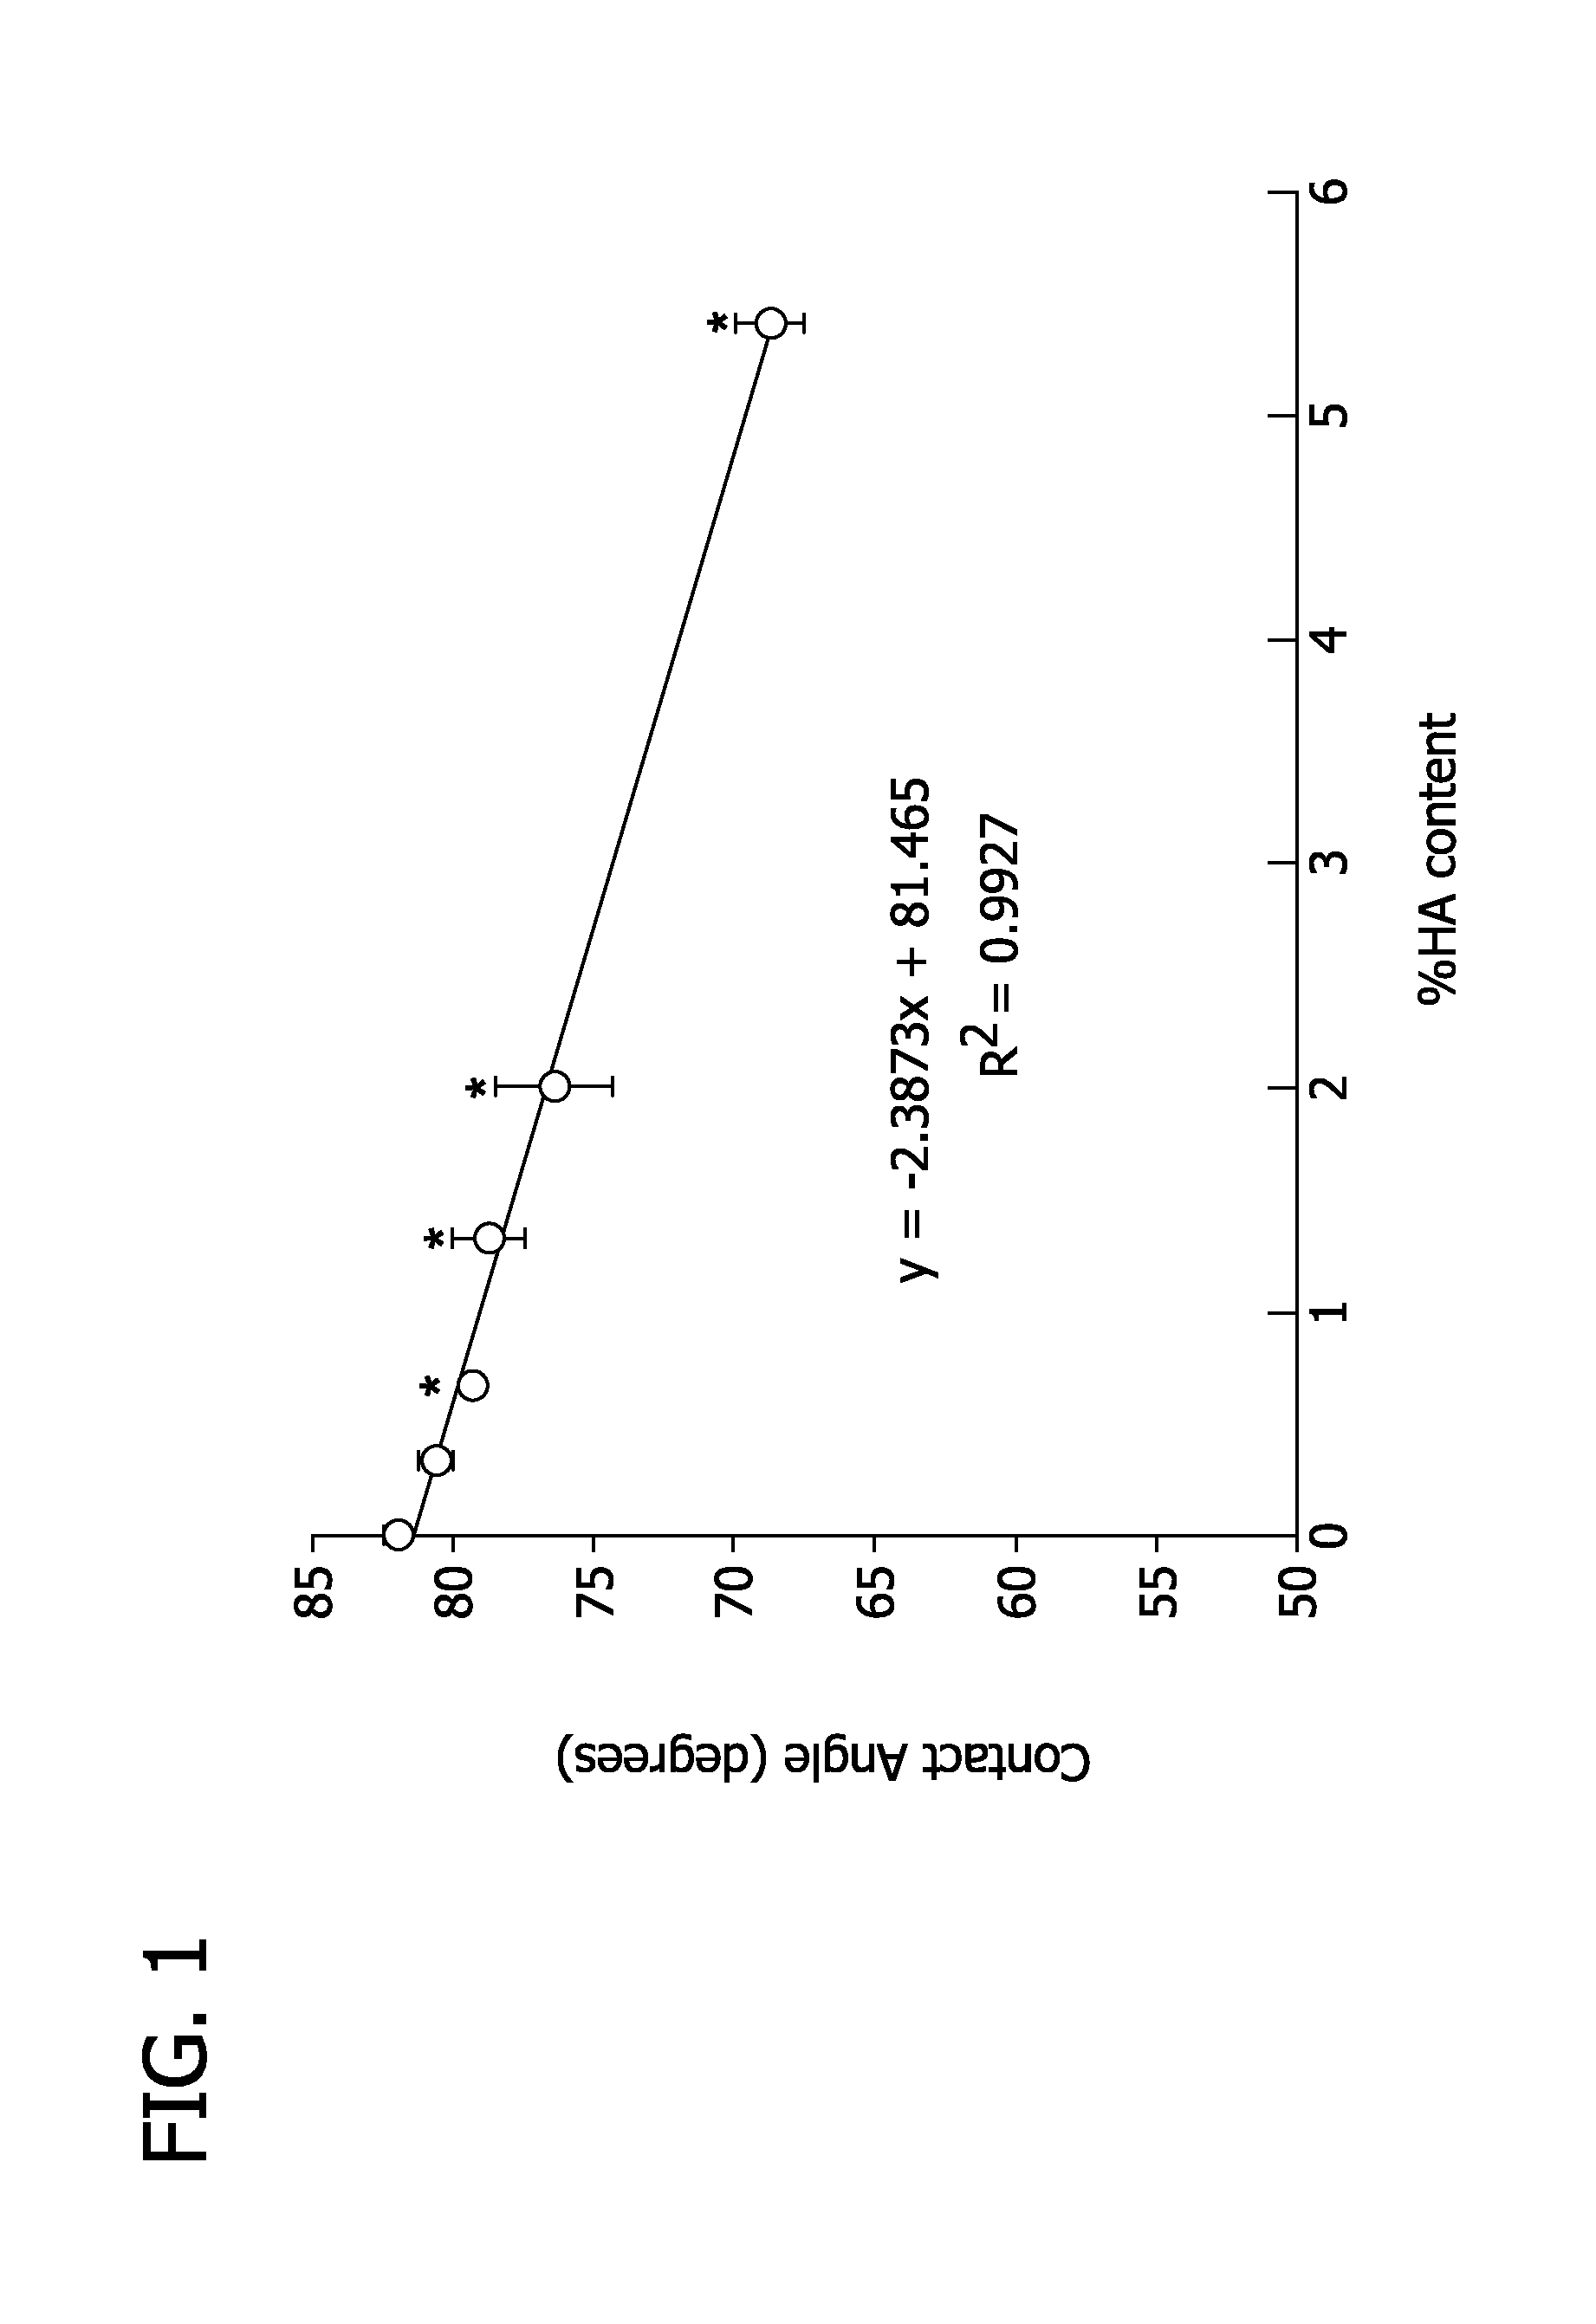 Aneurysm occlusion device containing bioactive and biocompatible copolymer shell and biocompatible metallic frame member